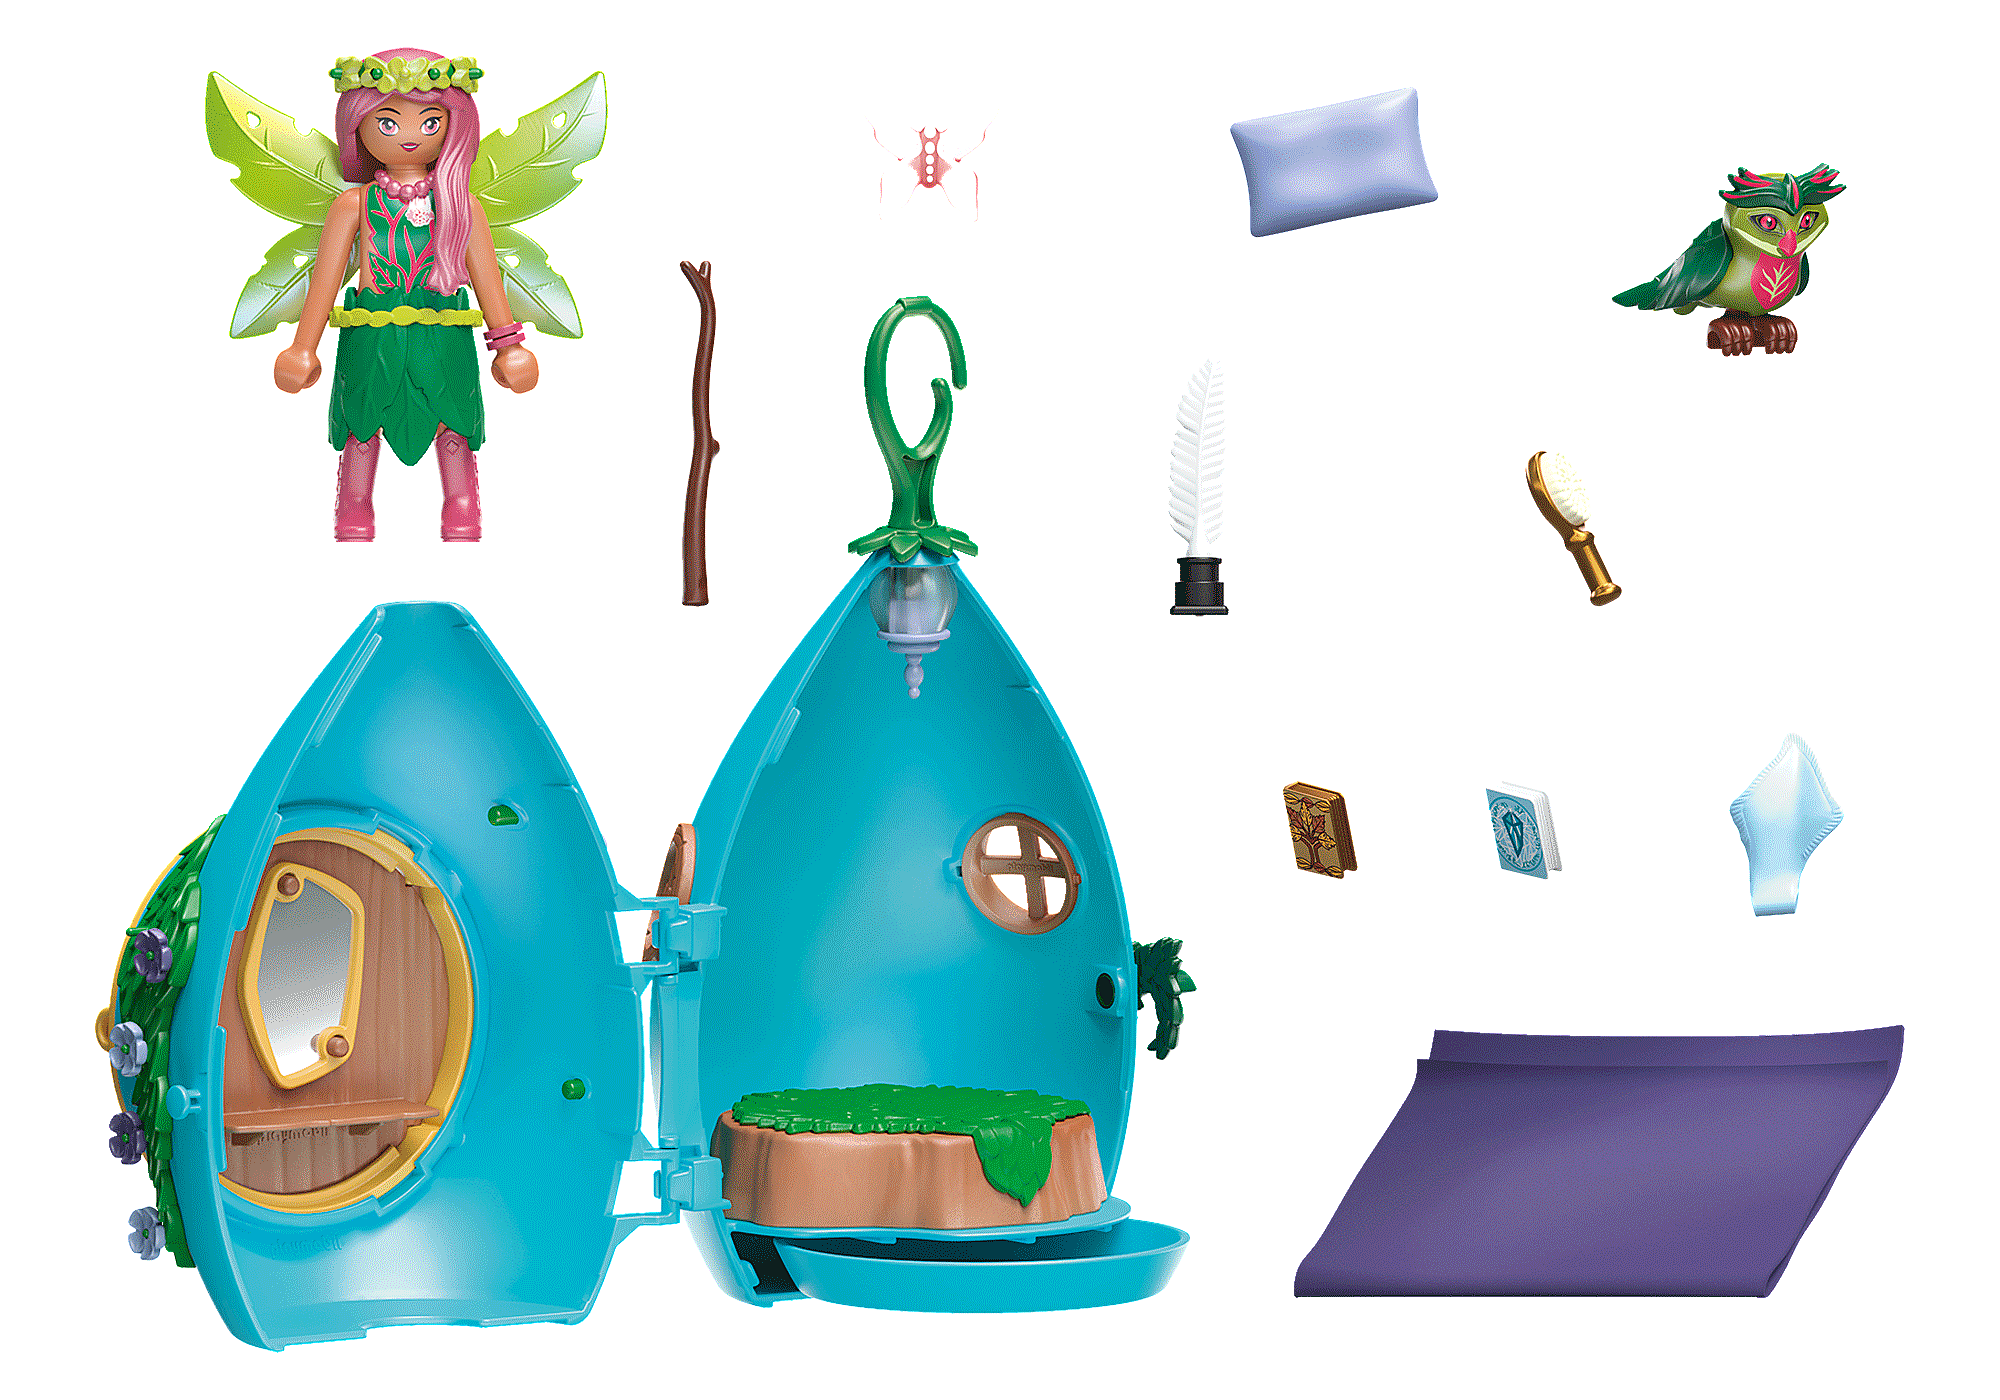 Playmobil Adventures of Ayuma Fairy Hut in Excellent Condition, Set 70804